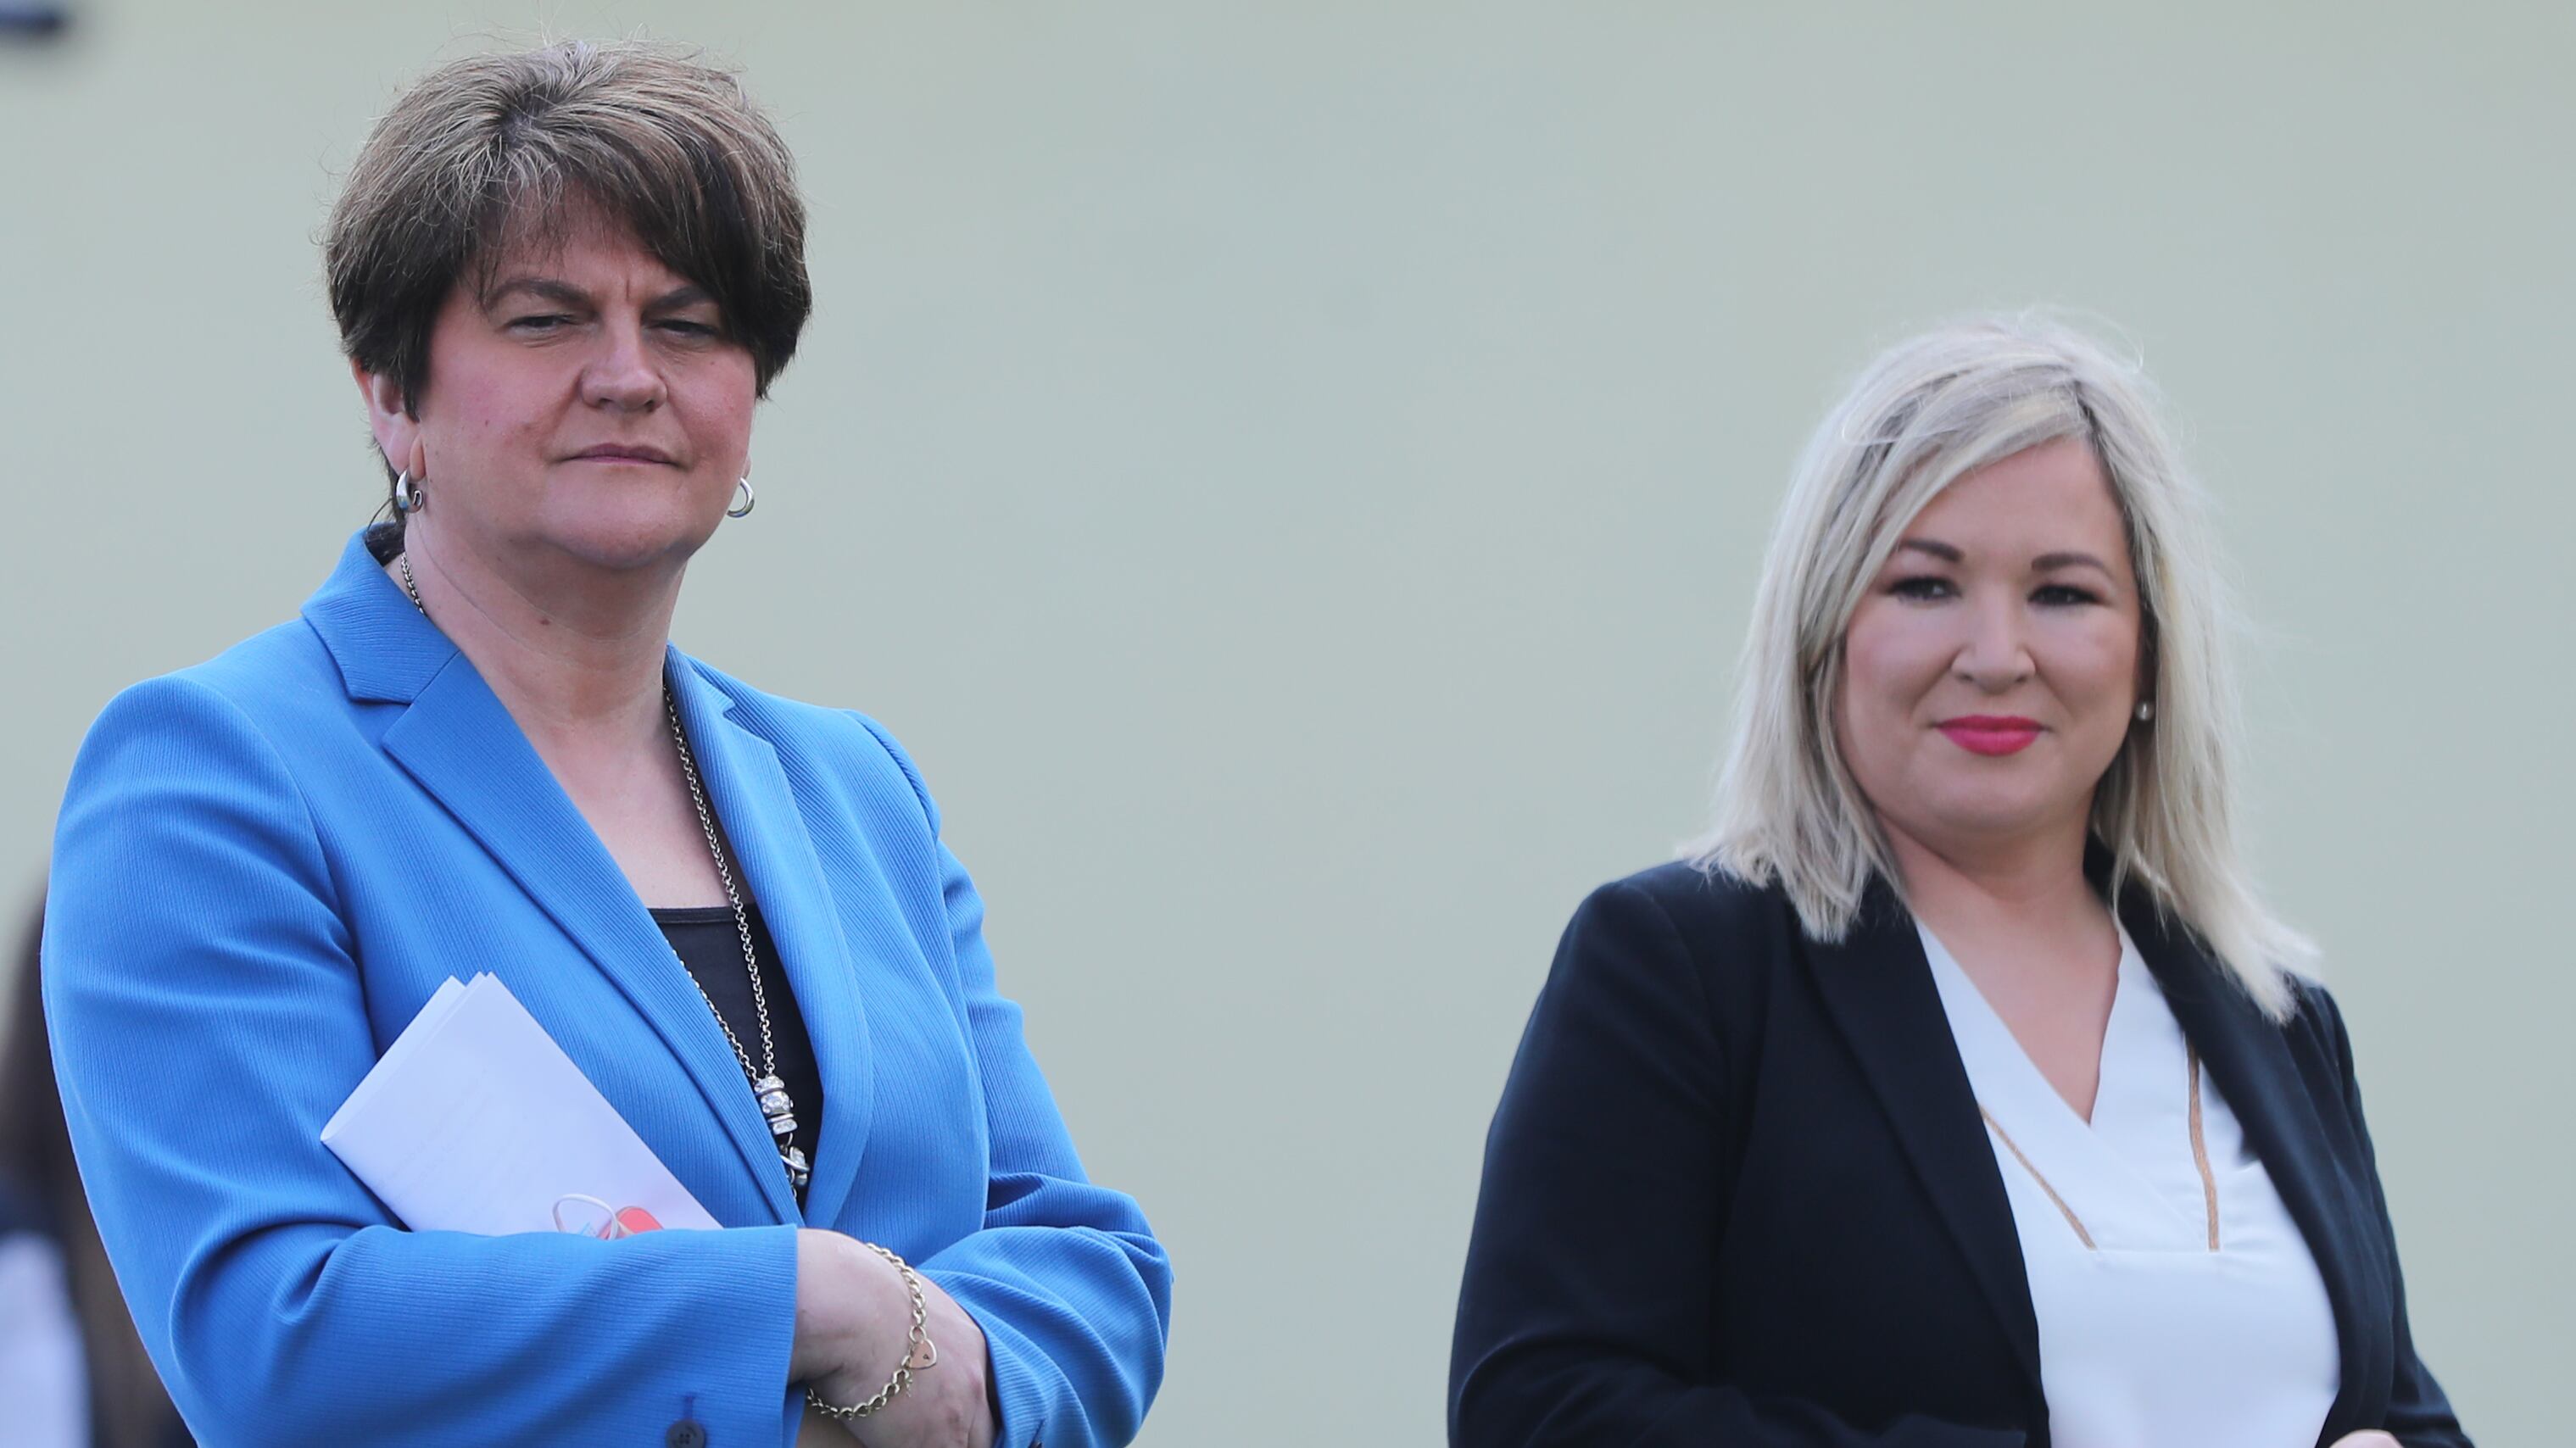 Baroness Foster and Michelle O’Neill have been giving evidence to the Covid-19 inquiry in Belfast